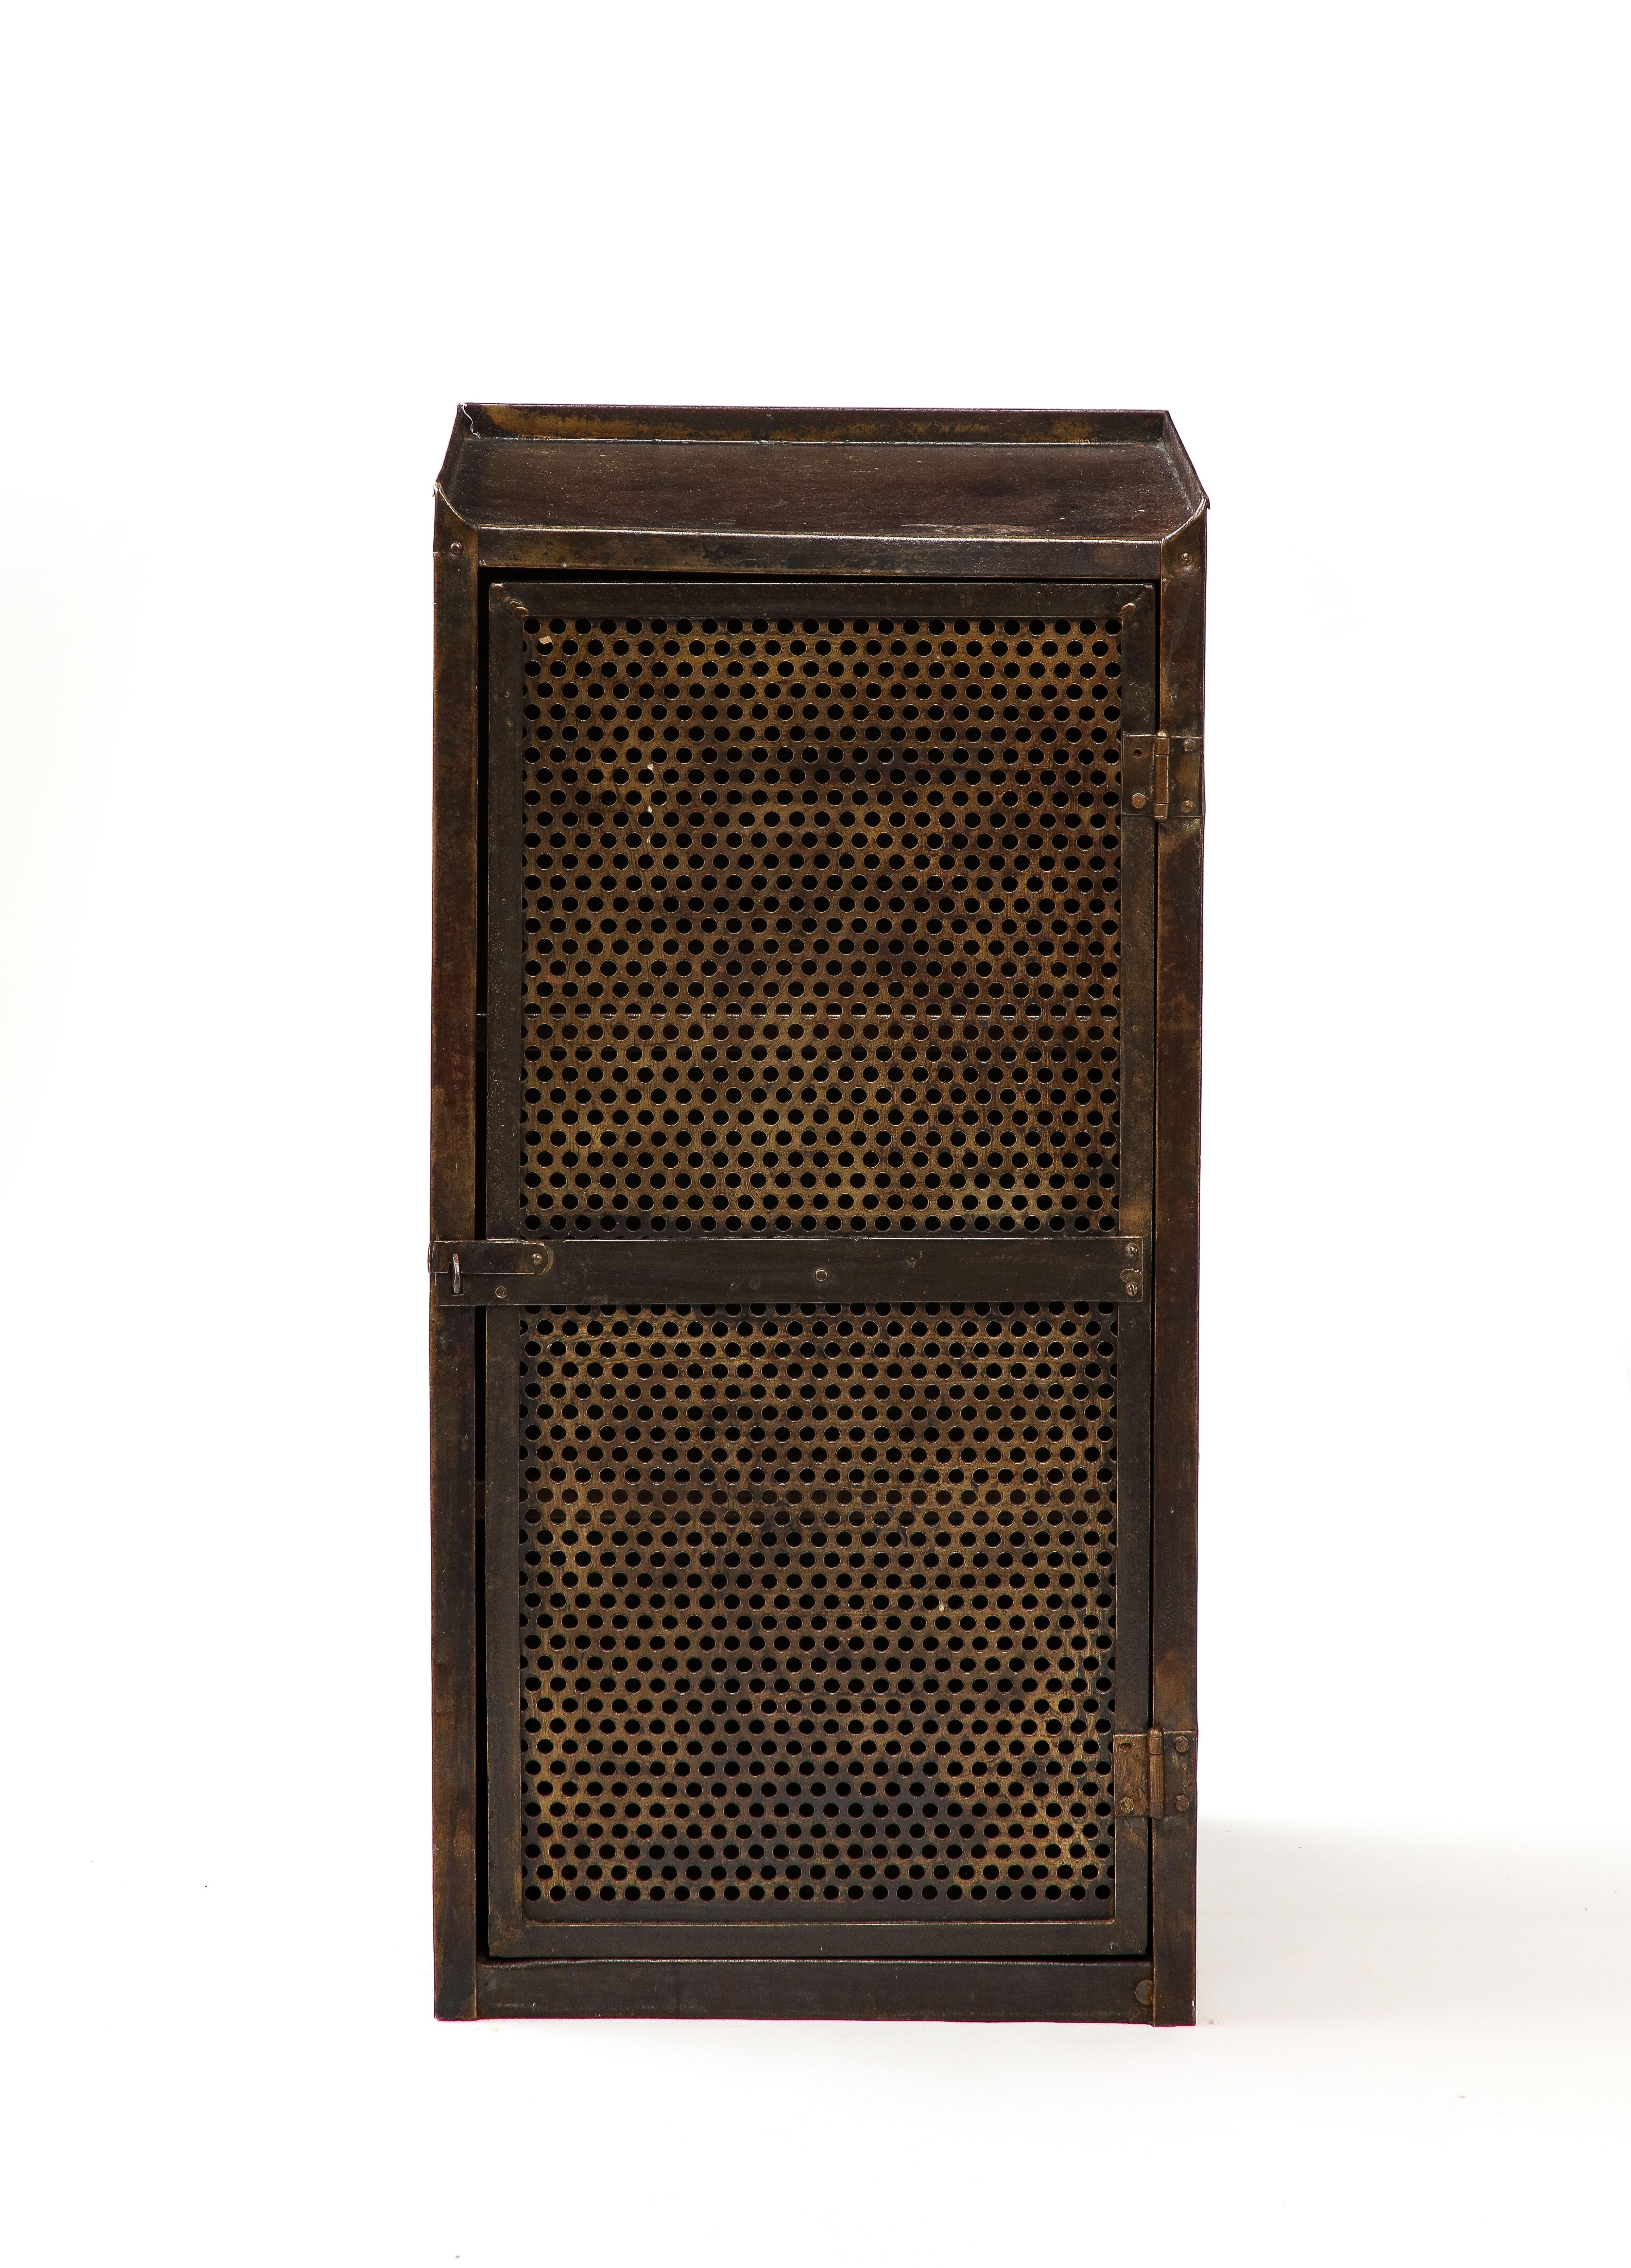 Metal cabinet with a swing latch, showcasing a mesh door and two interior shelves.